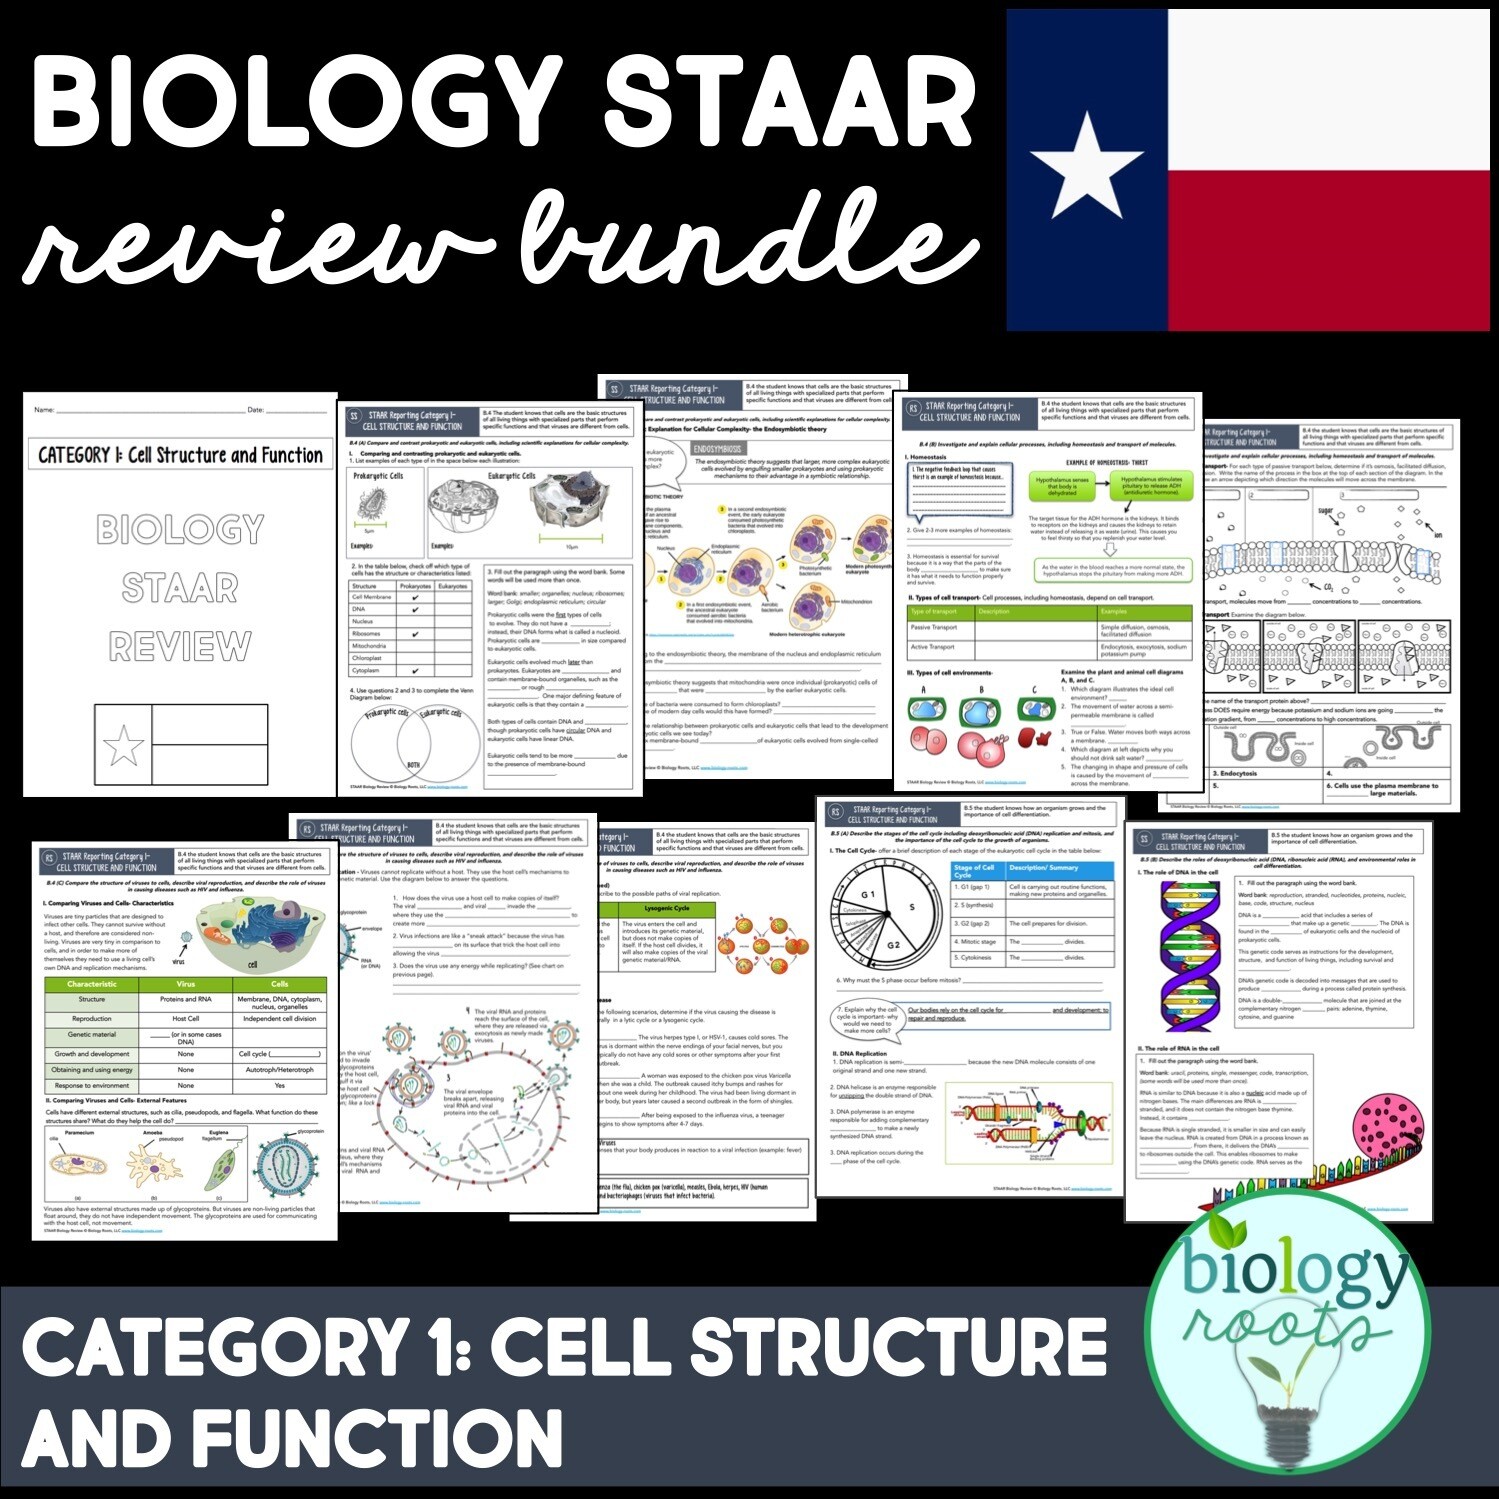 STAAR Biology Review Reporting Category 1